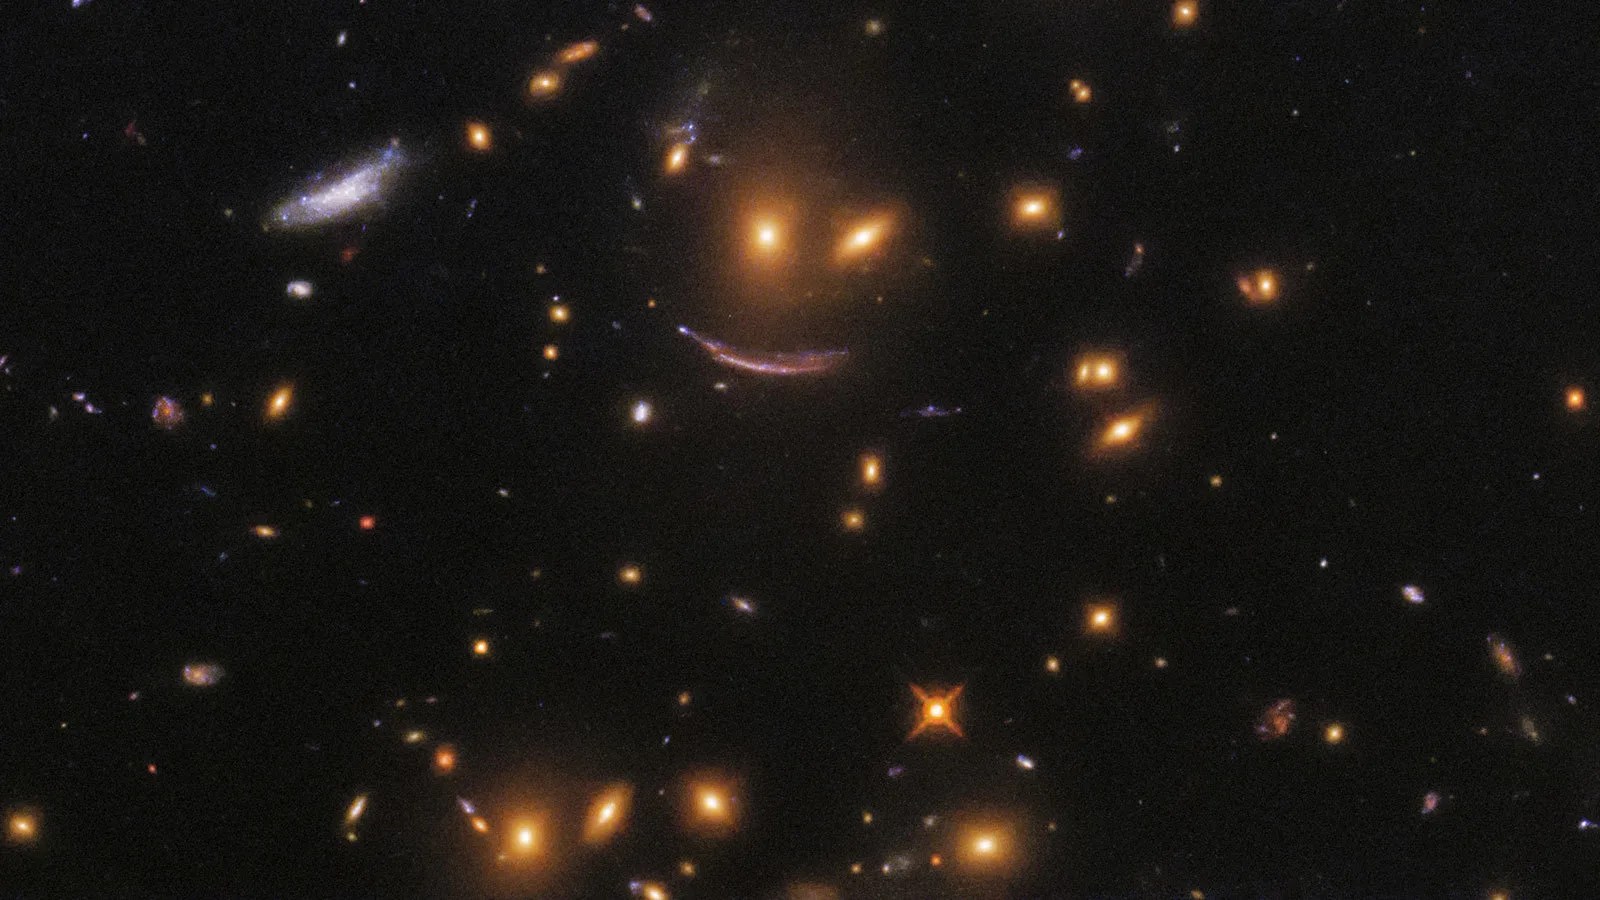 Collection of multiple galaxies, including three that form a traditional smiley face shape.